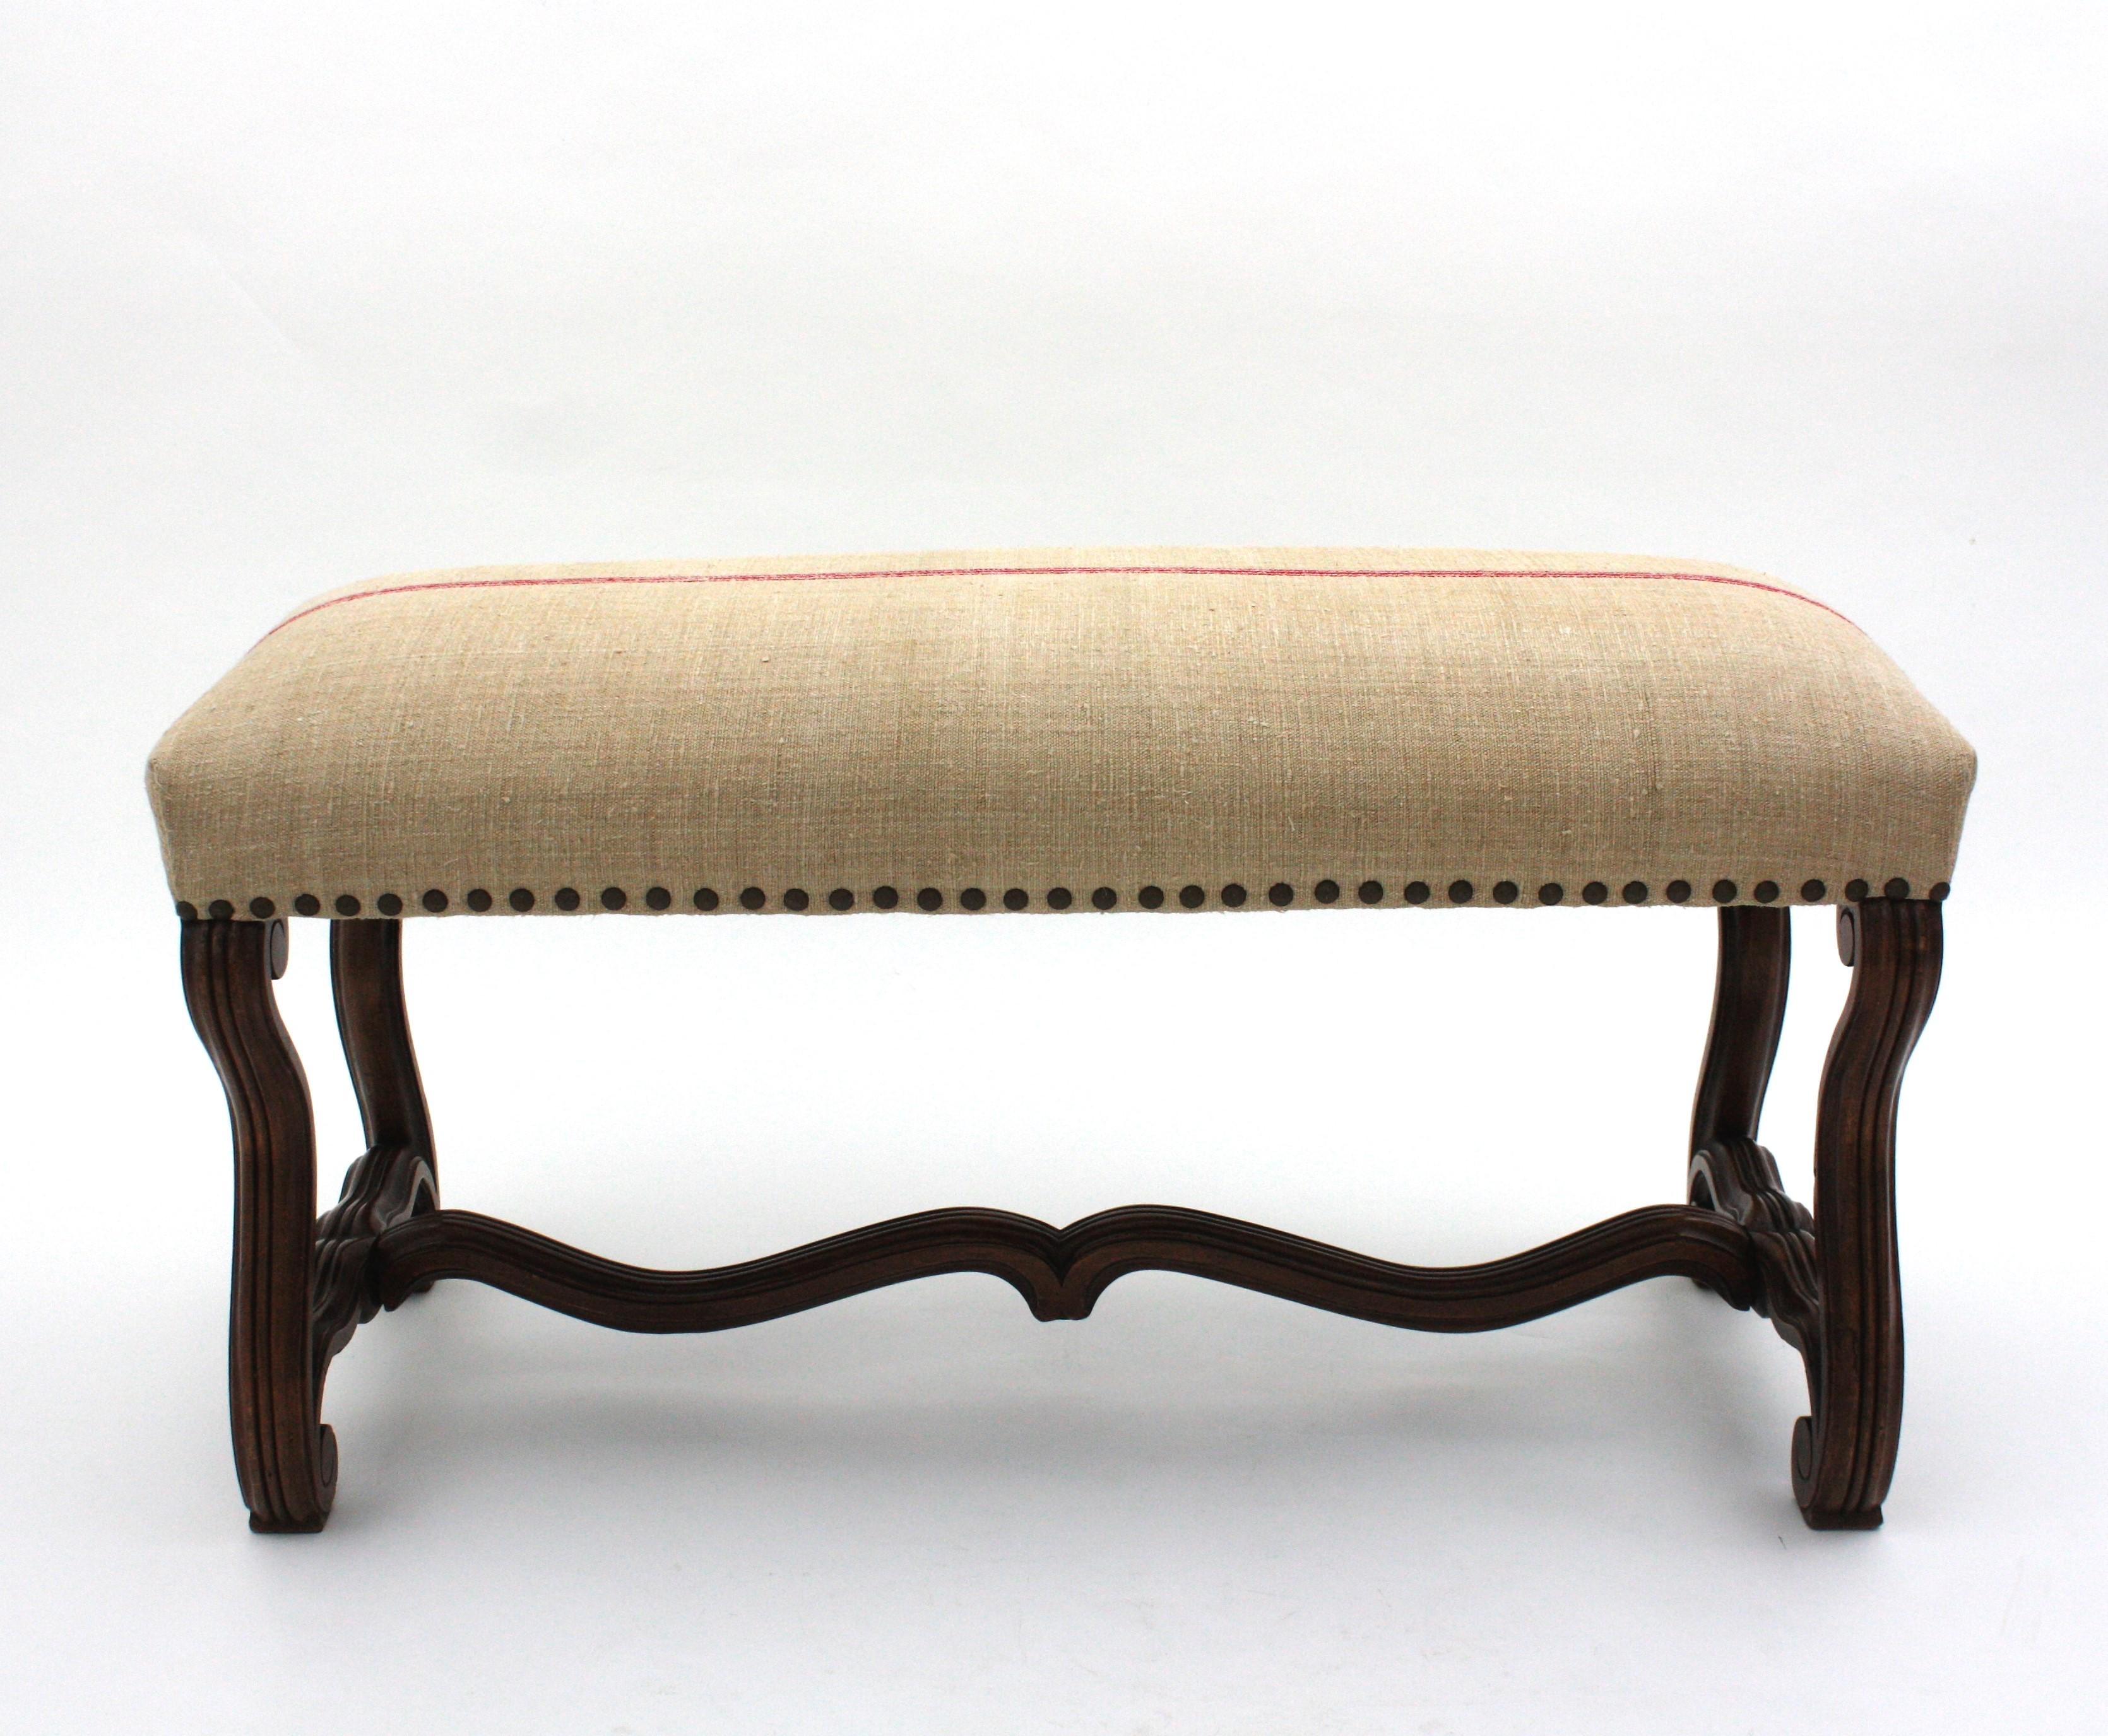 Os de Mouton Louis XIV Walnut Bench with French Linen Upholstery For Sale 11